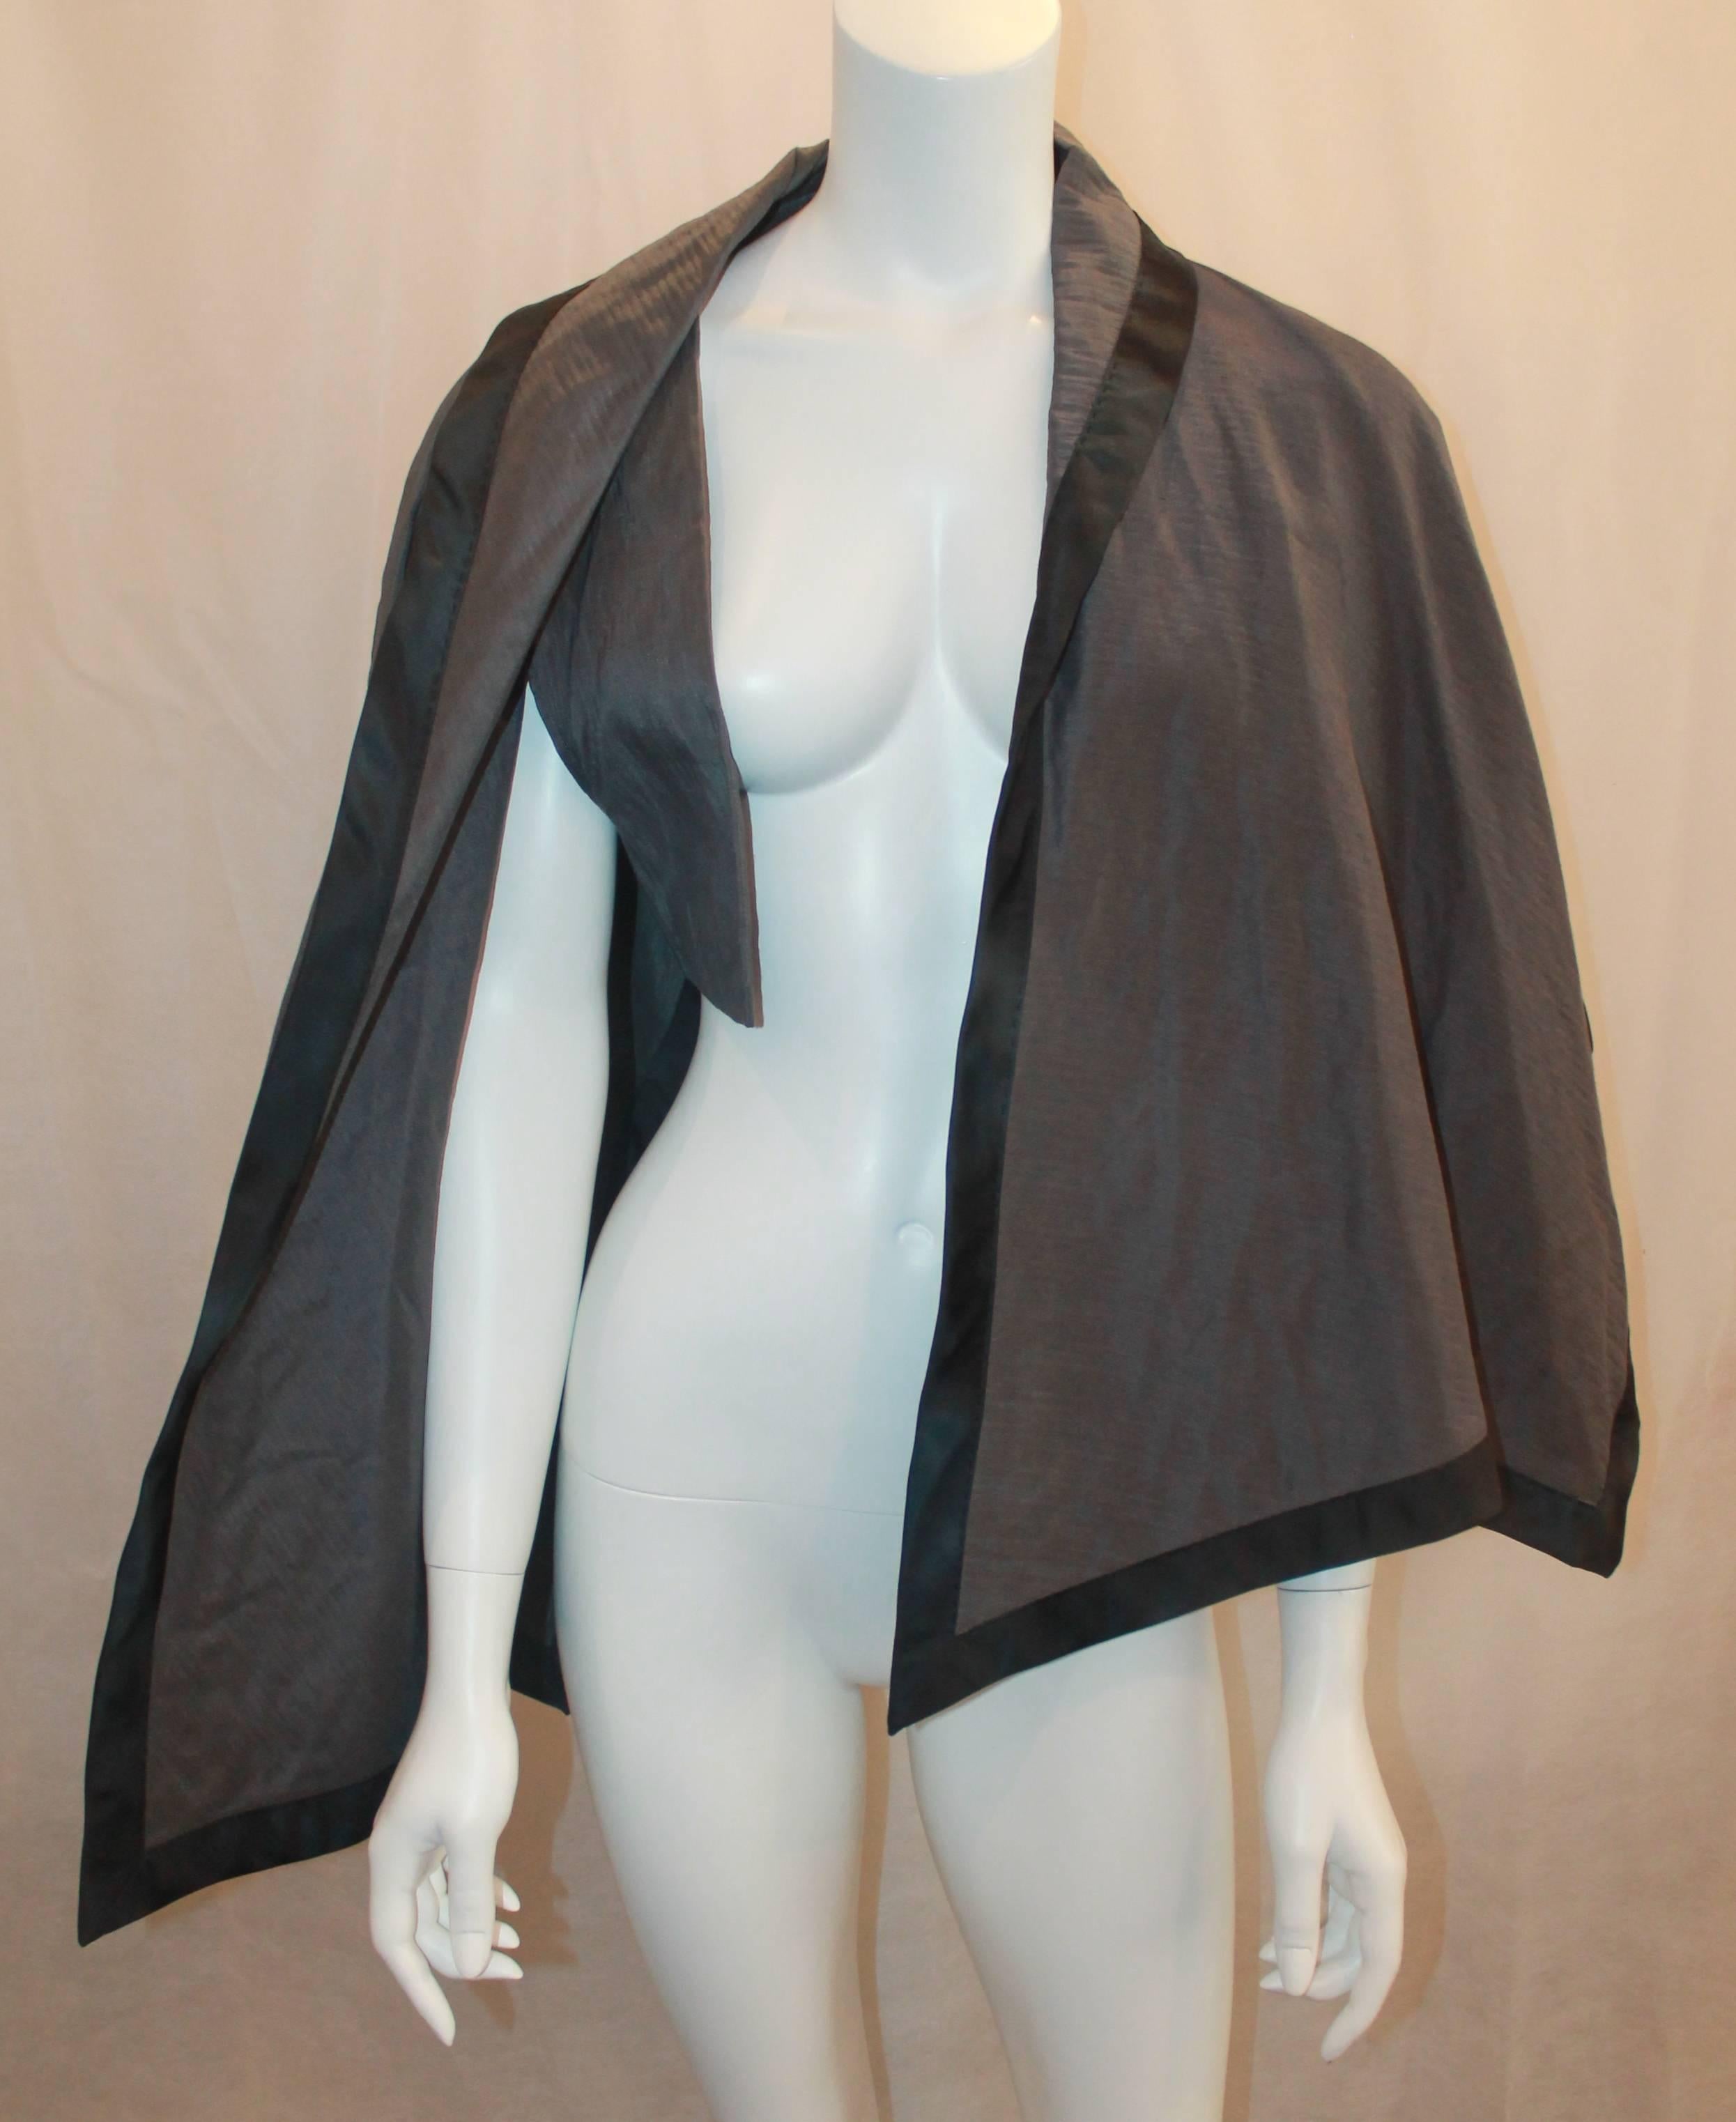 Nina Ricci Vintage Gray and Black Linen and Silk Blend Vest/Cape - Size 44. This beautiful and elegant vintage cape has an interior vest, is asymmetrical, and gray with a black trim. It is in excellent condition.

Measurements:
Bust: about